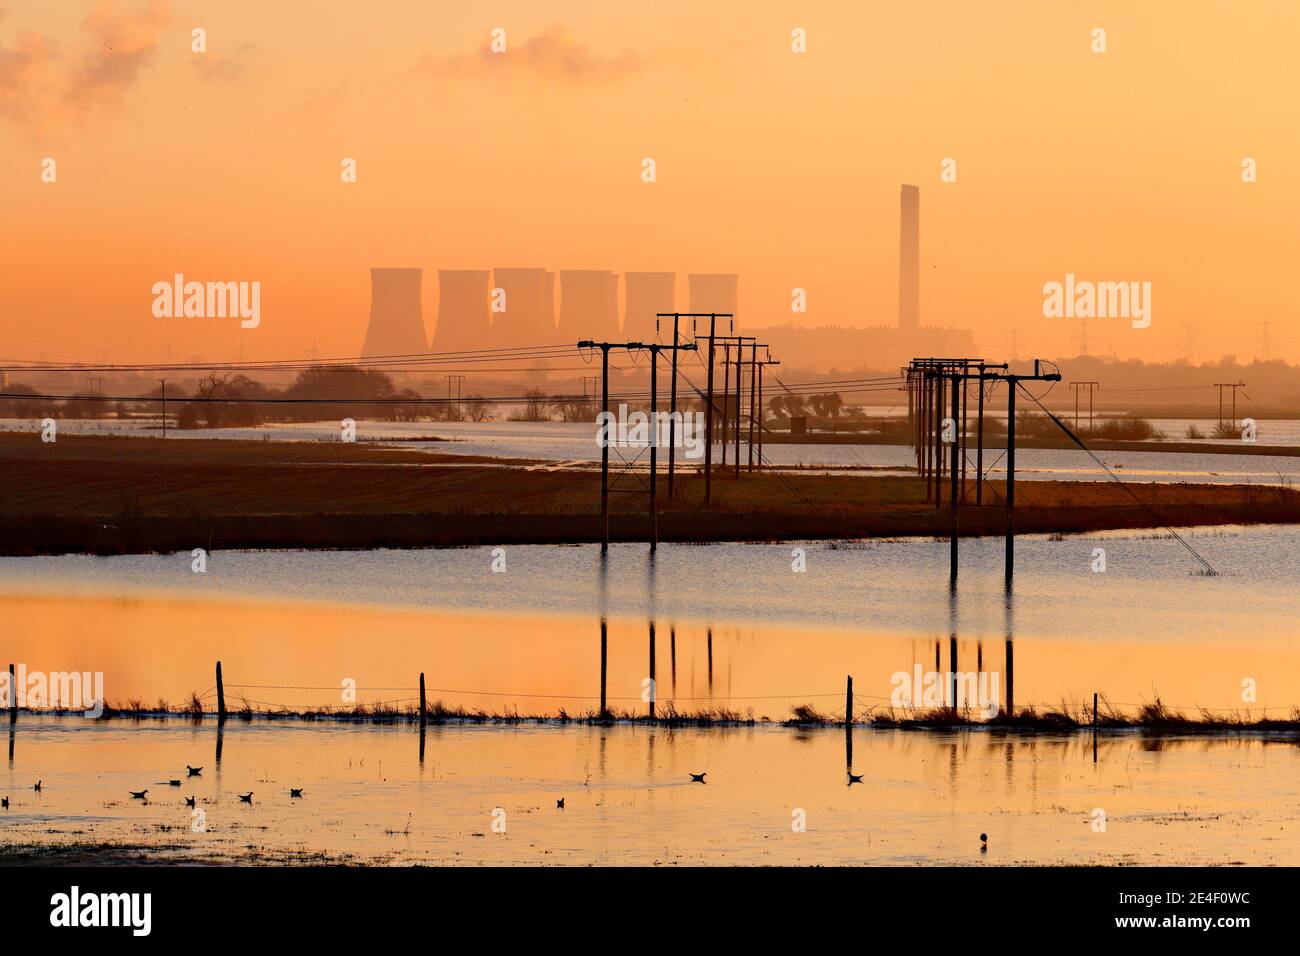 View from Ferrybridge towards Eggborough Power Station. Pylons and telegraph poles surrounded by floodwater from Storm Christoph Stock Photo